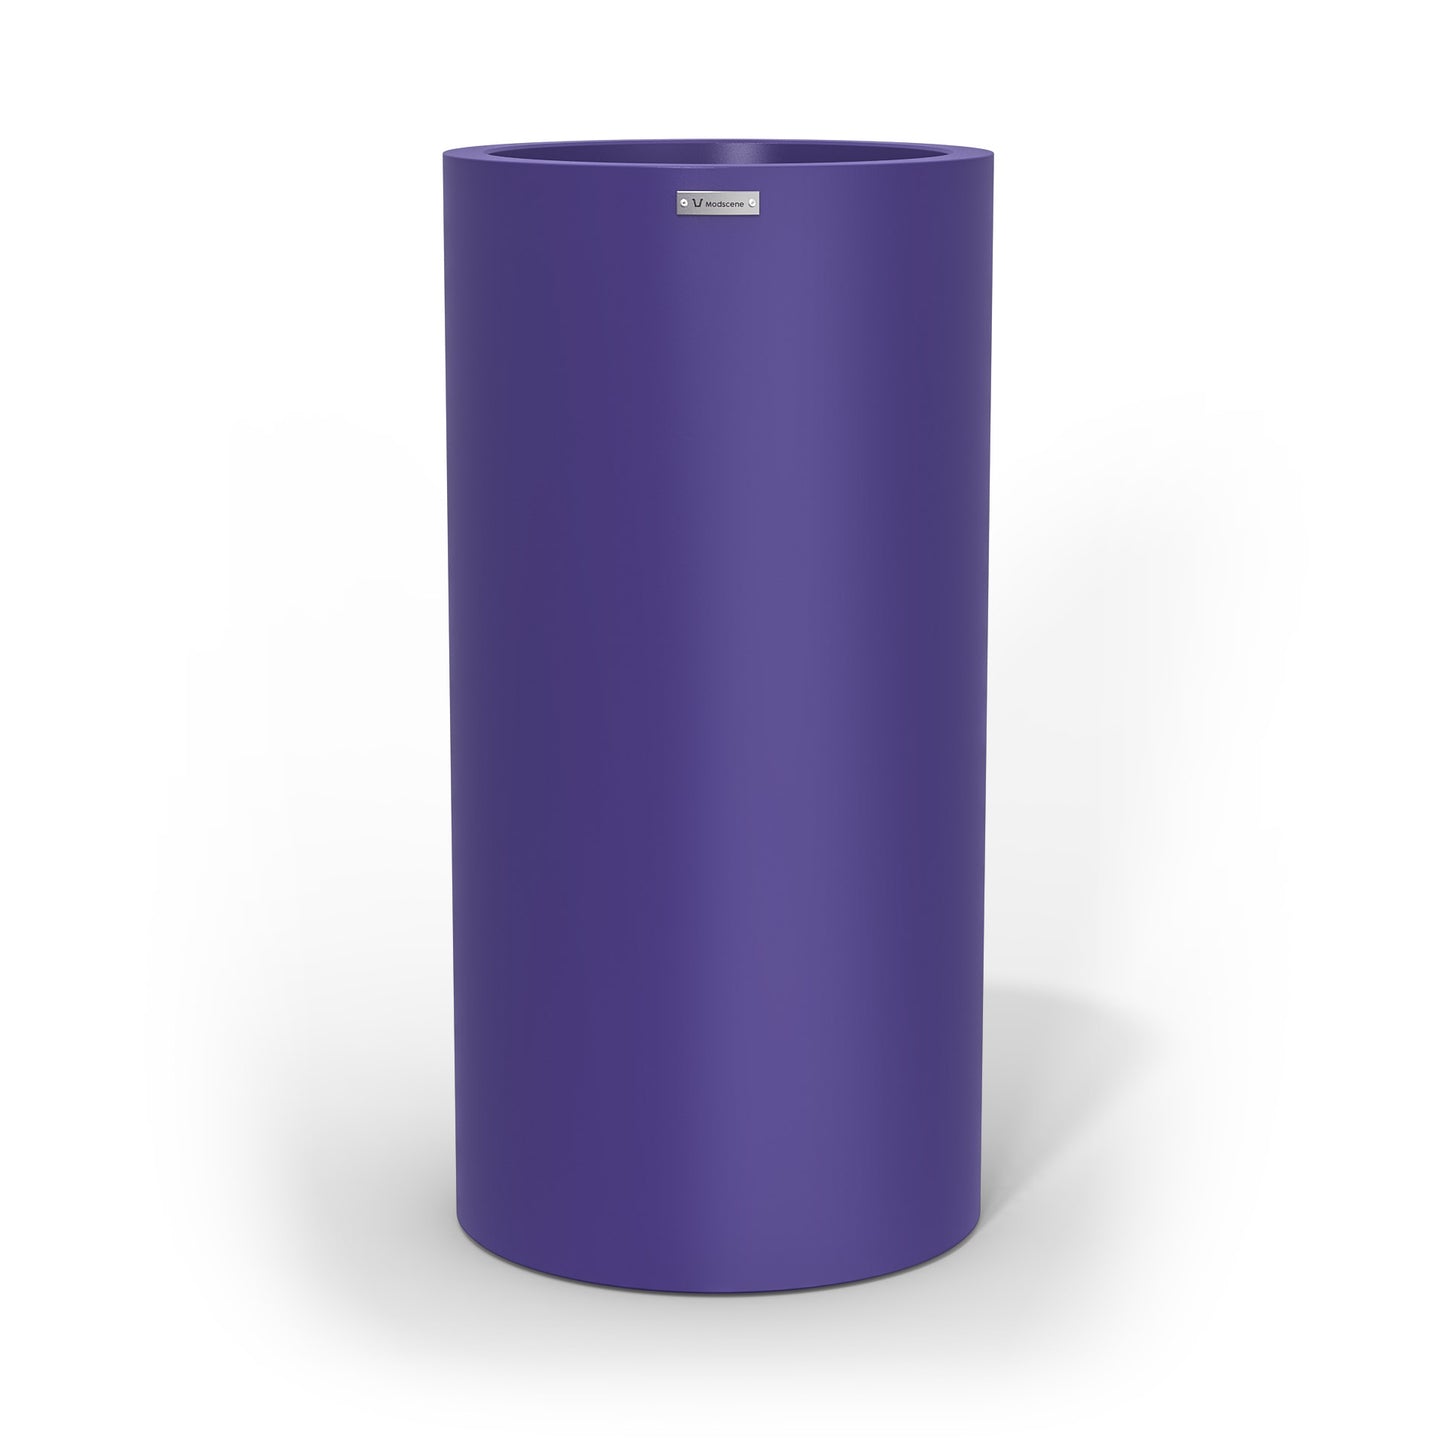 A tall cylinder planter pot in purple made by Modscene New Zealand.